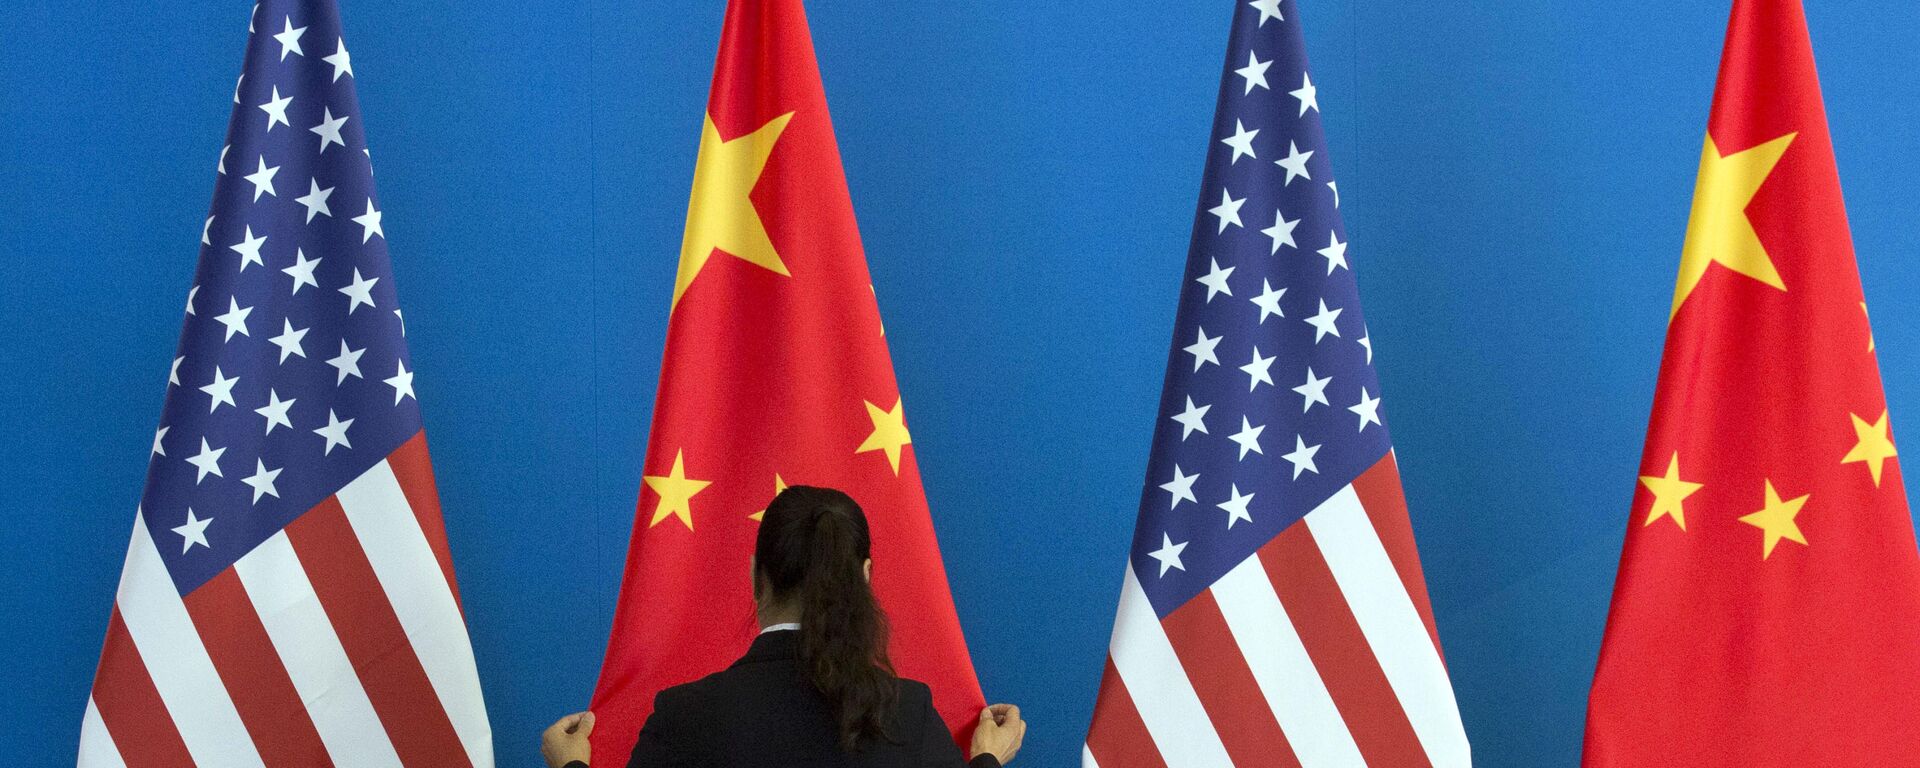 A Chinese woman adjusts the Chinese national flag near U.S. national flags before a Strategic Dialogue expanded meeting that's part of the U.S.-China Strategic and Economic Dialogue at the Diaoyutai State Guesthouse in Beijing, Thursday, July 10, 2014 - Sputnik International, 1920, 02.08.2022